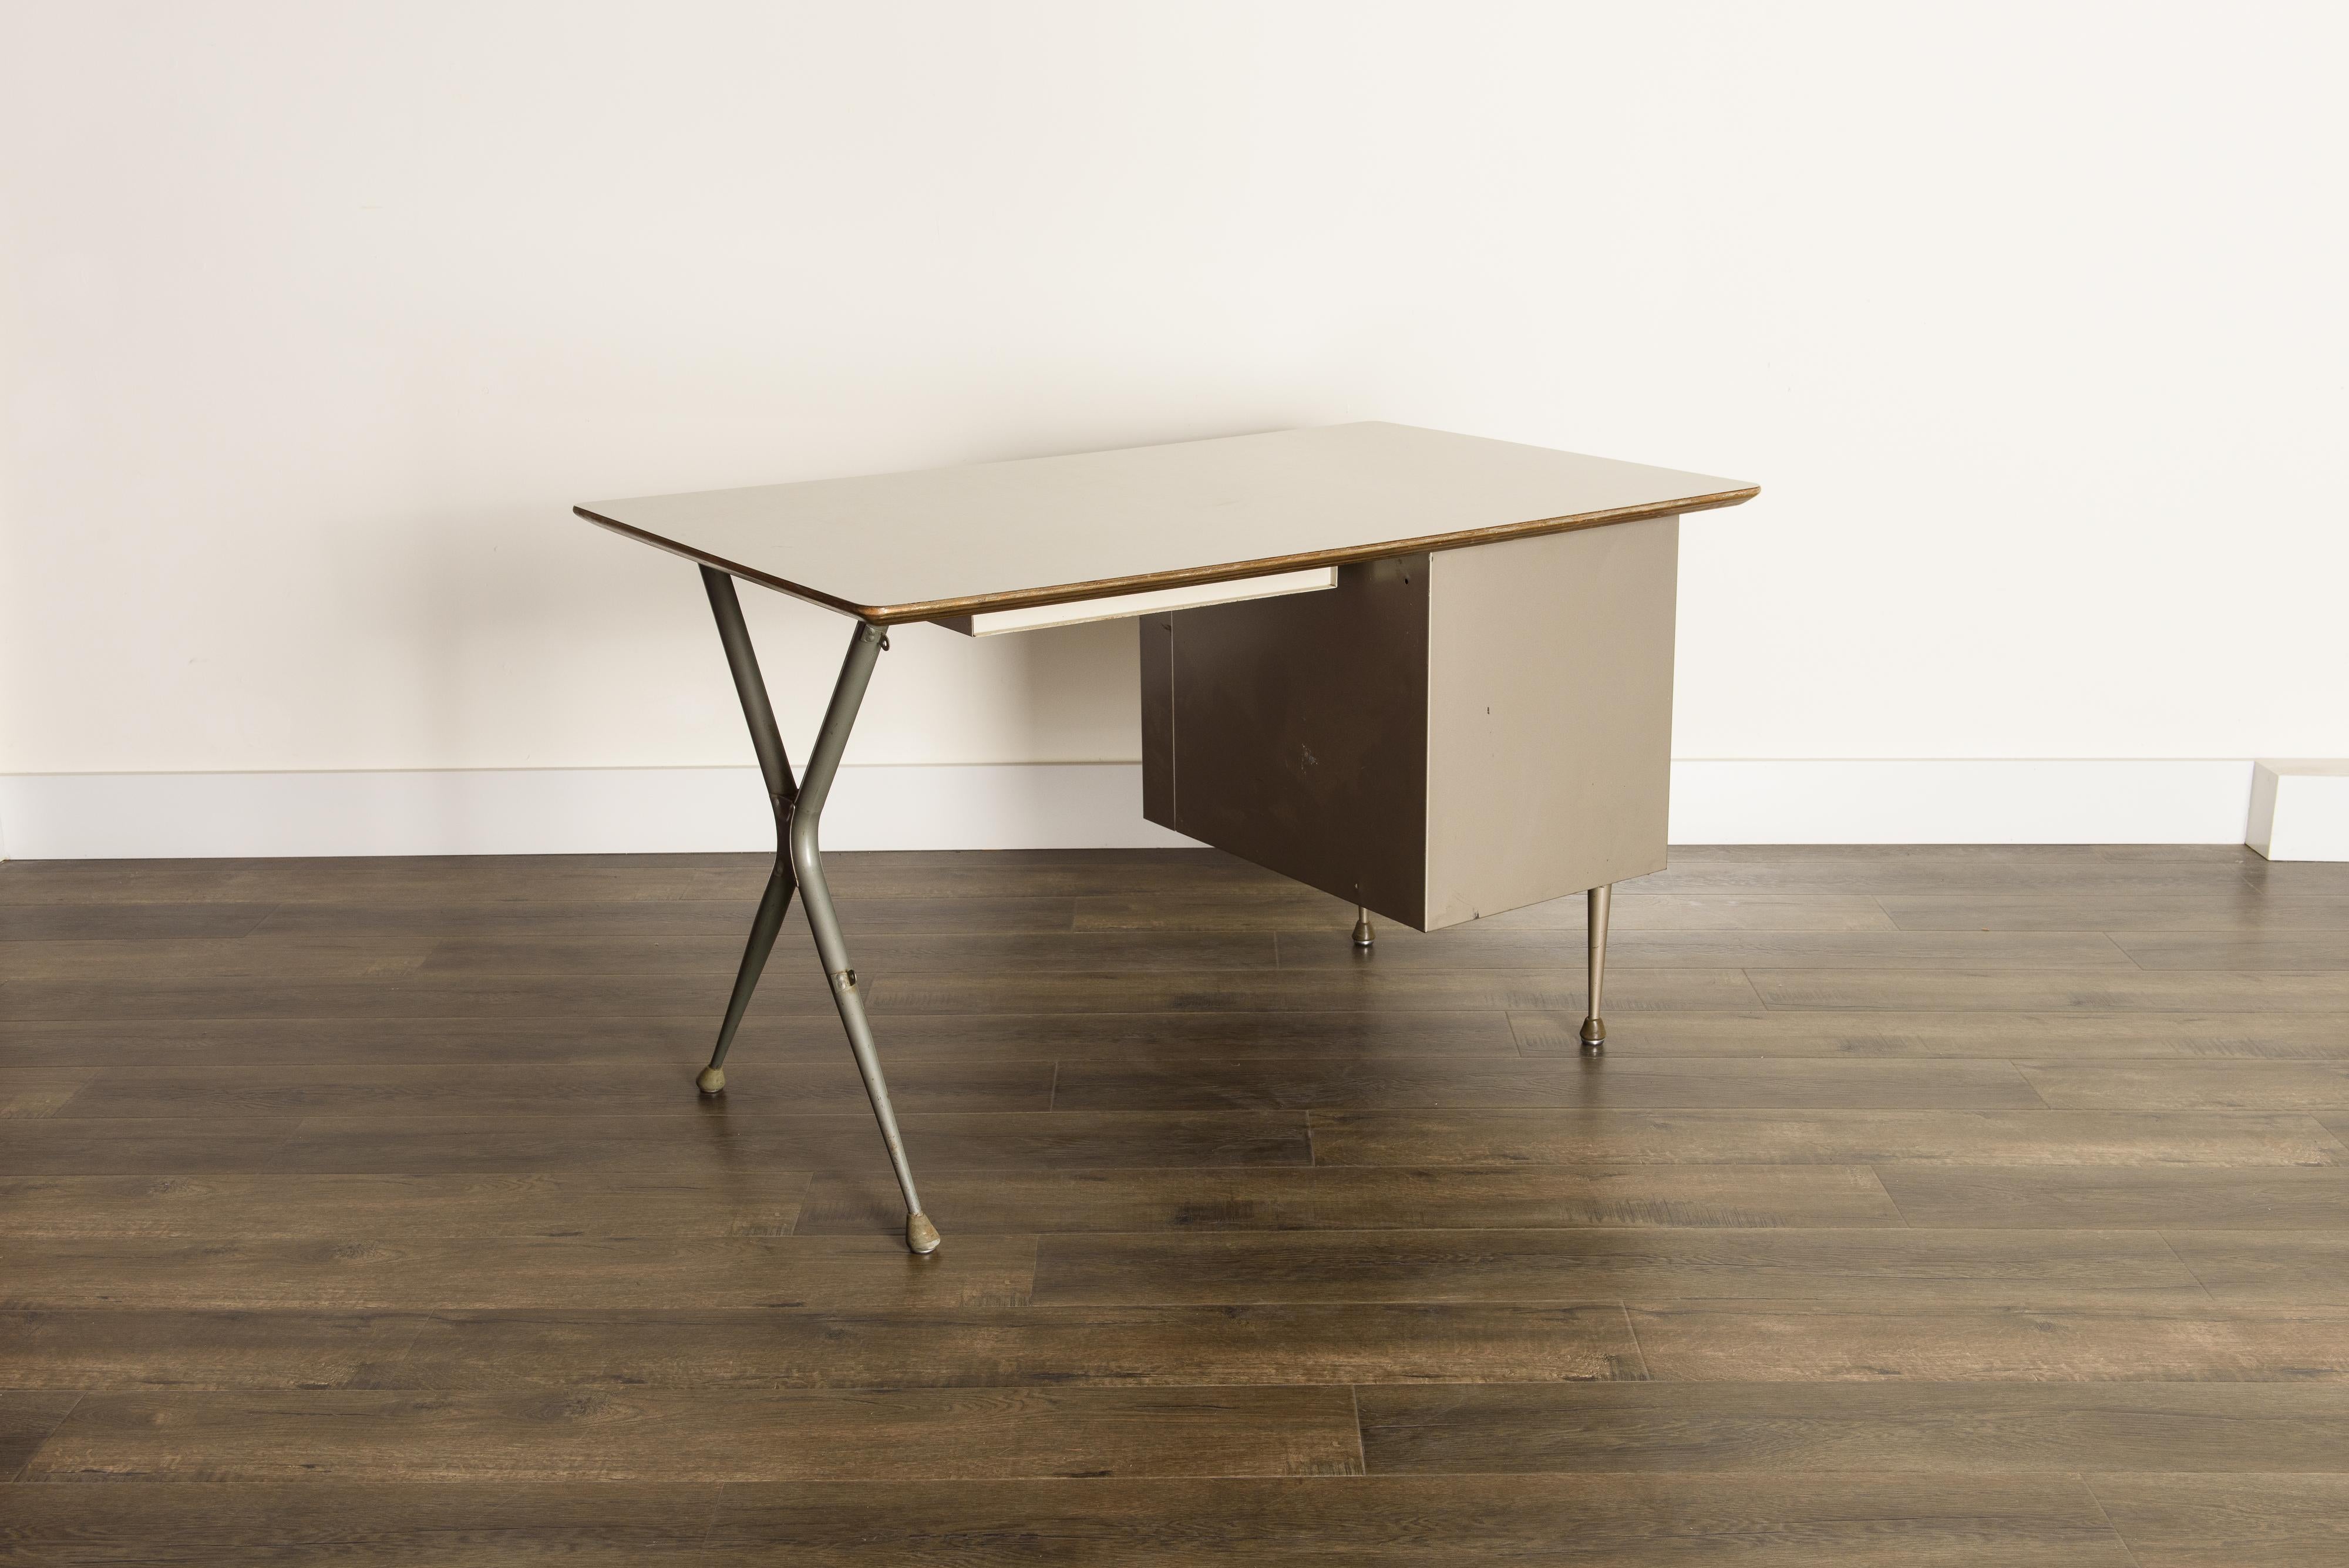 Mid-20th Century Industrial Desk by Raymond Loewy for Brunswick of Chicago, circa 1950s, Signed 